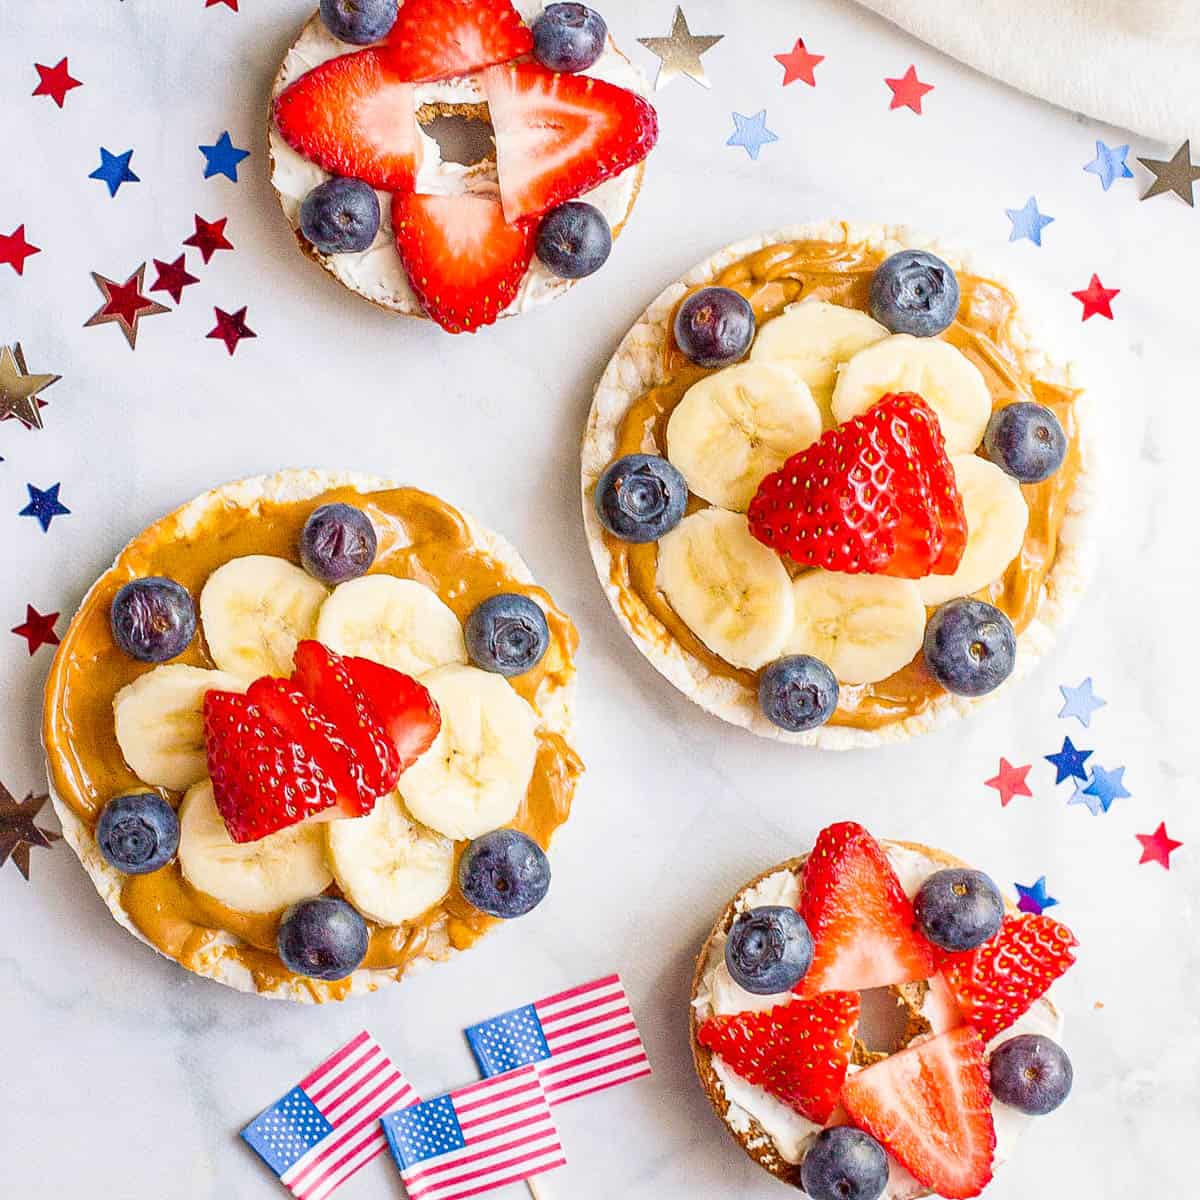 Red white and blue themed breakfasts and snacks with stars and flags nearby for decoration.